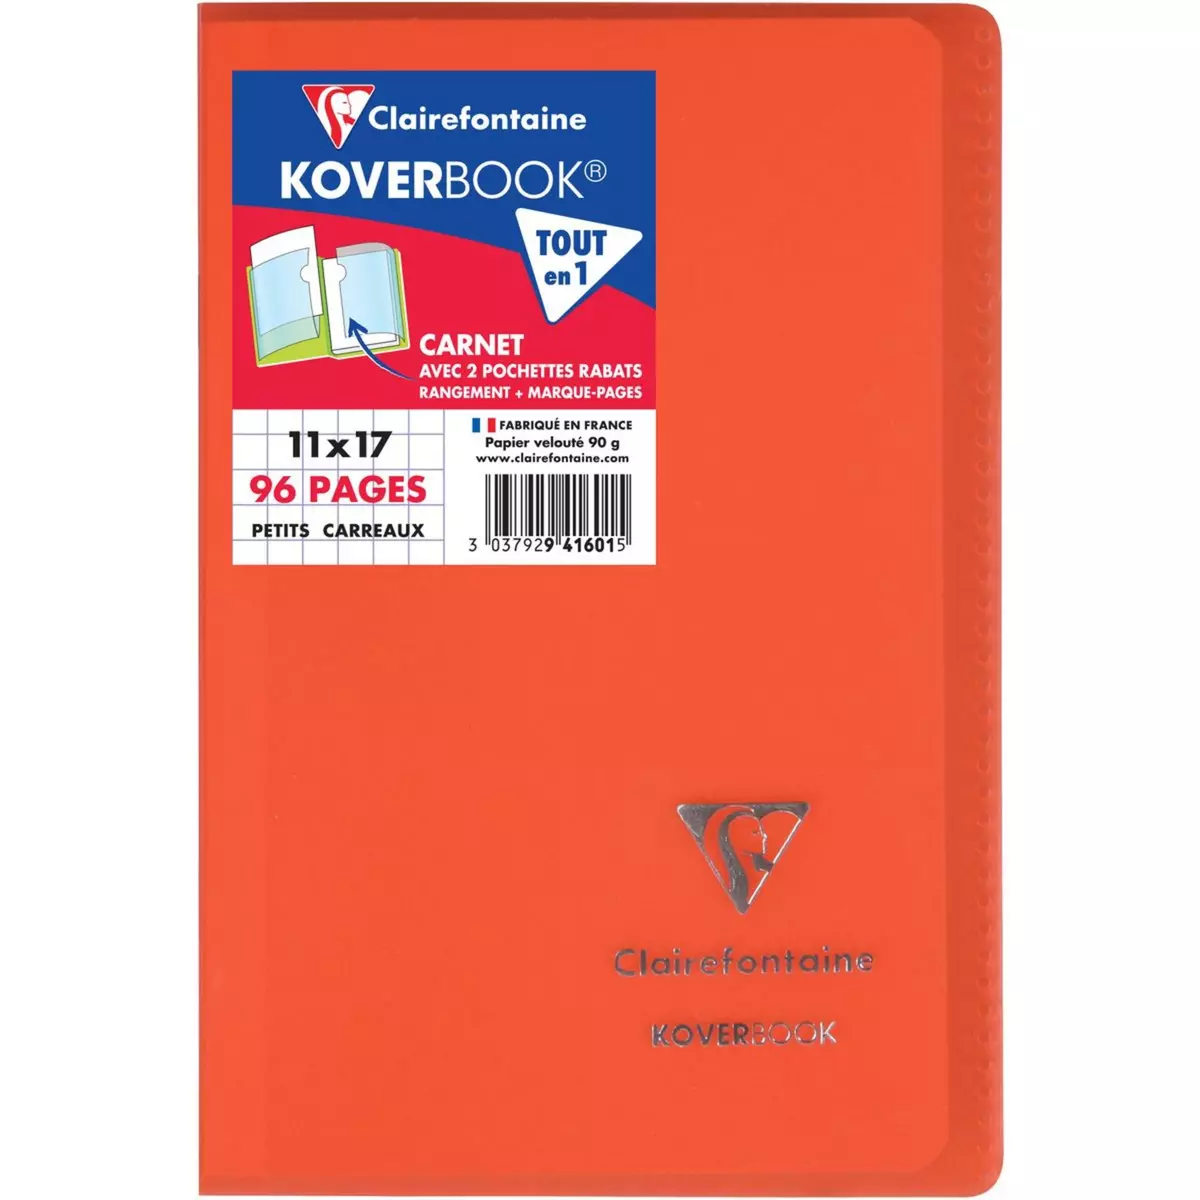 CLAIREFONTAINE Carnet piqûre petits carreaux Kover Book 110x170 96 pages Clairefontaine - Rouge